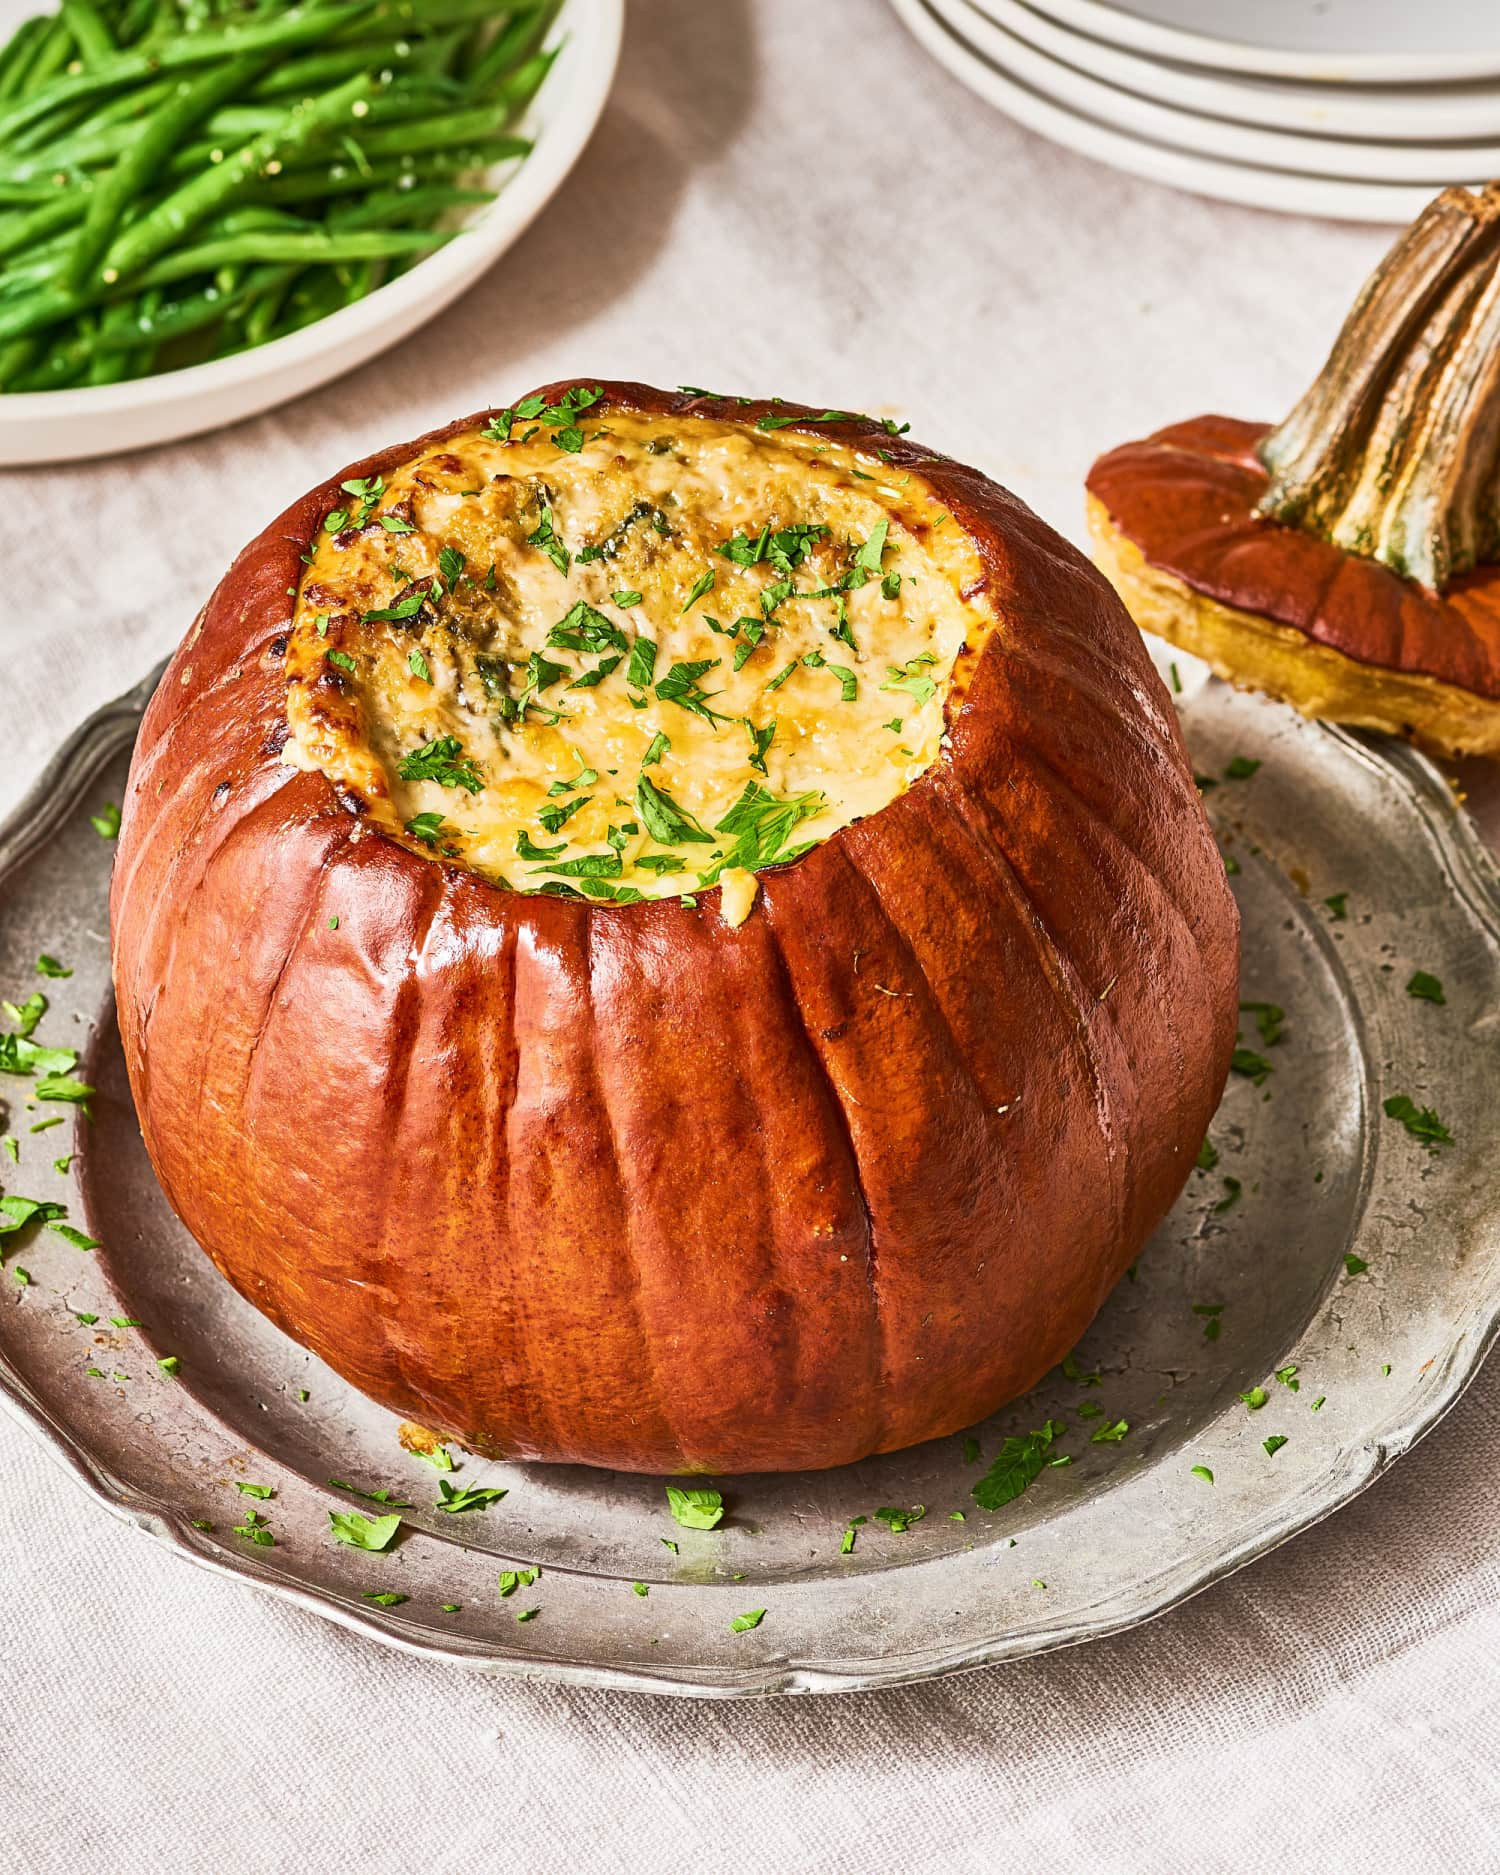 Vegetarian Main Dishes For Thanksgiving
 10 Showstopping Ve arian Main Dishes for Thanksgiving